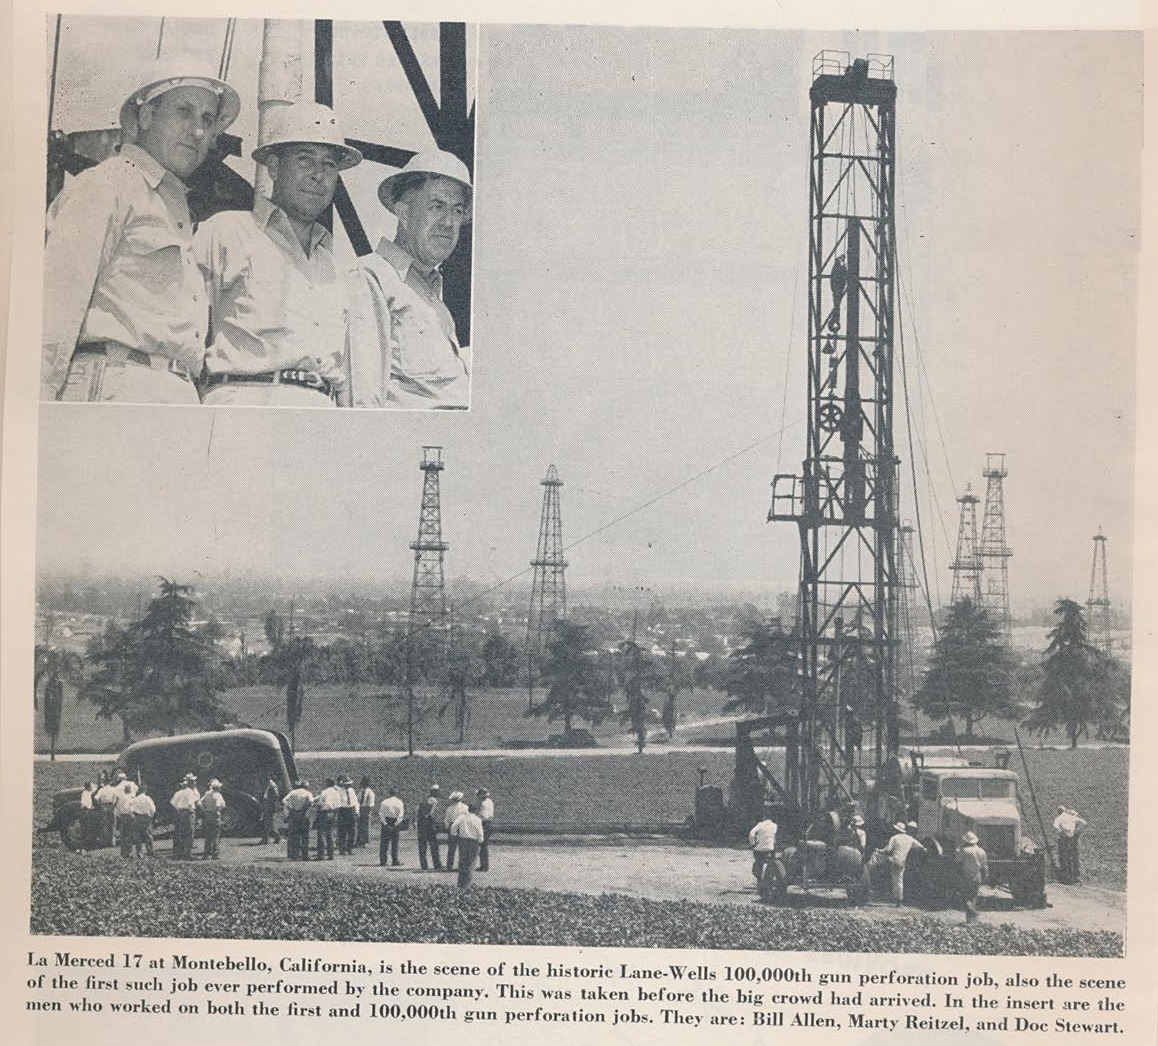 Magazine article about historic Lane-Wells 100,000the oil well perforation.